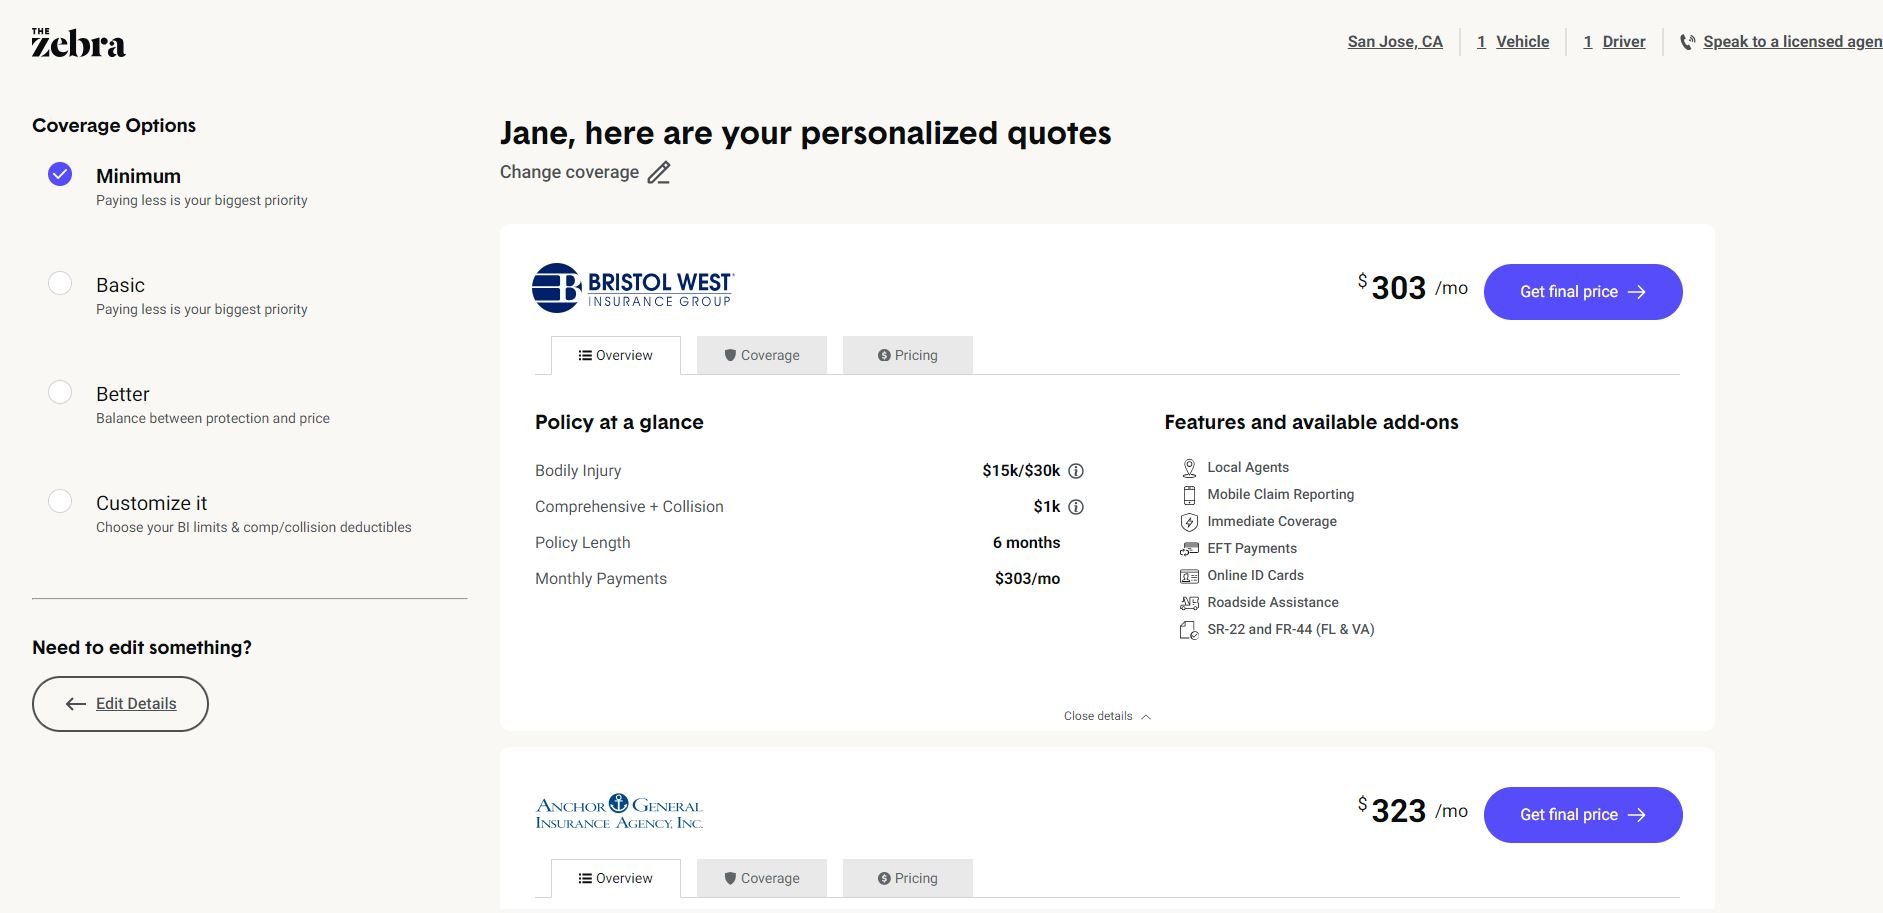 The Zebra quote results page showing three real-time quotes